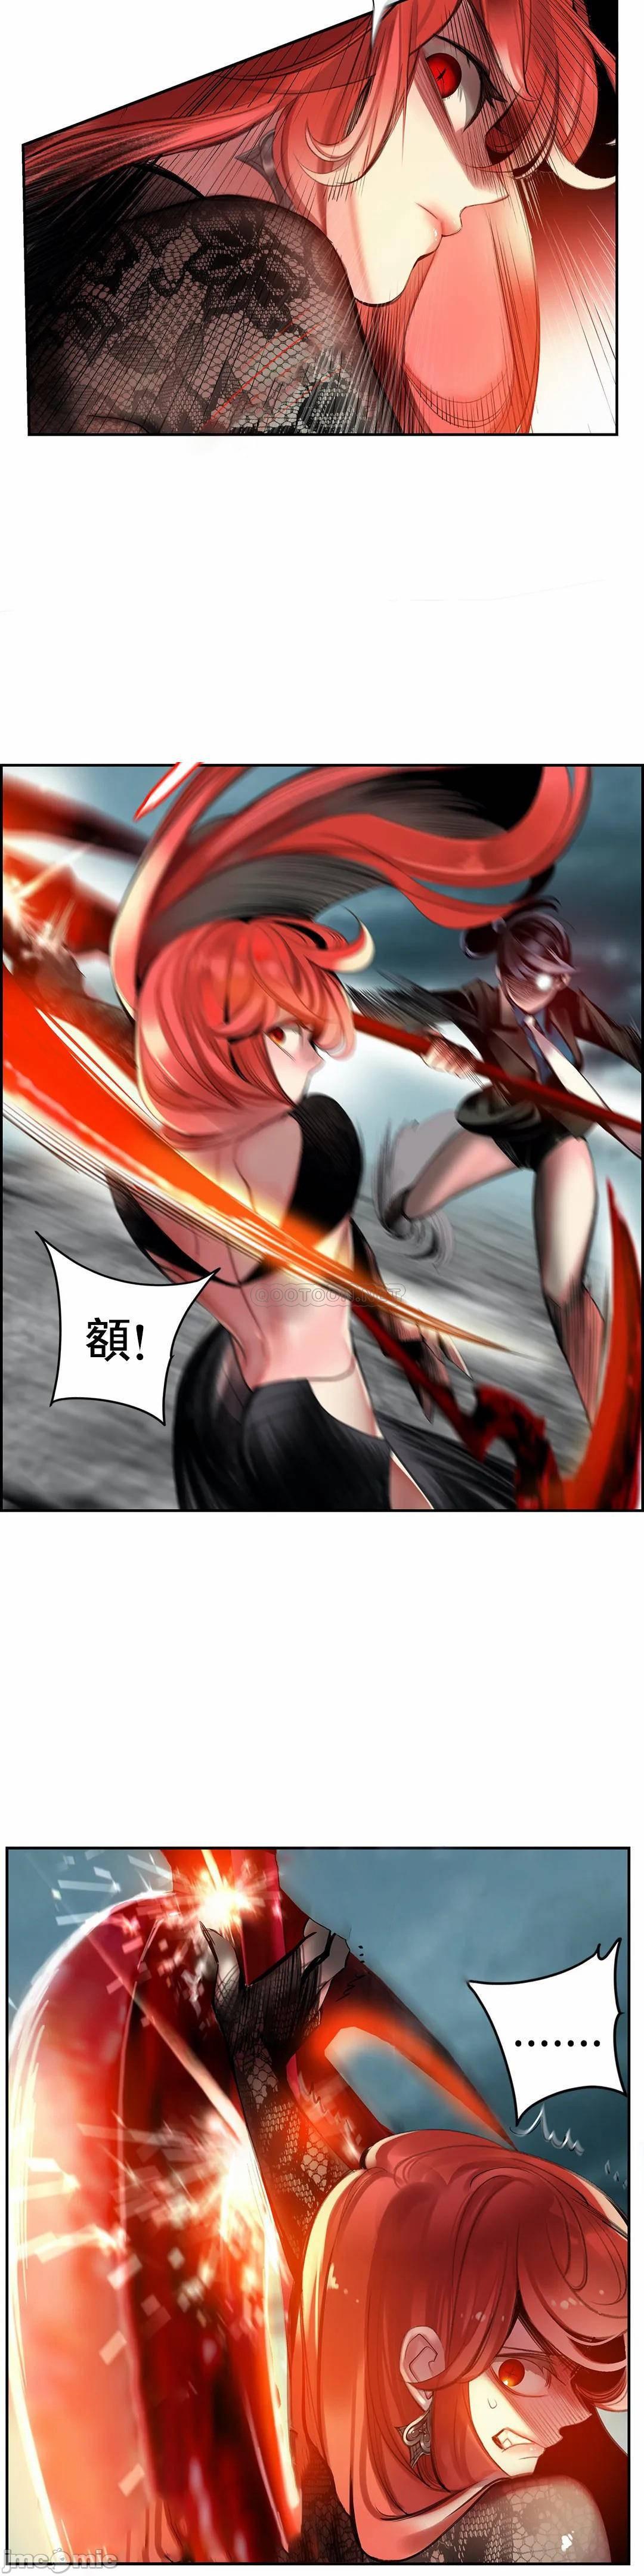 [Juder] Lilith`s Cord (第二季) Ch.77-93 end [Chinese] 327